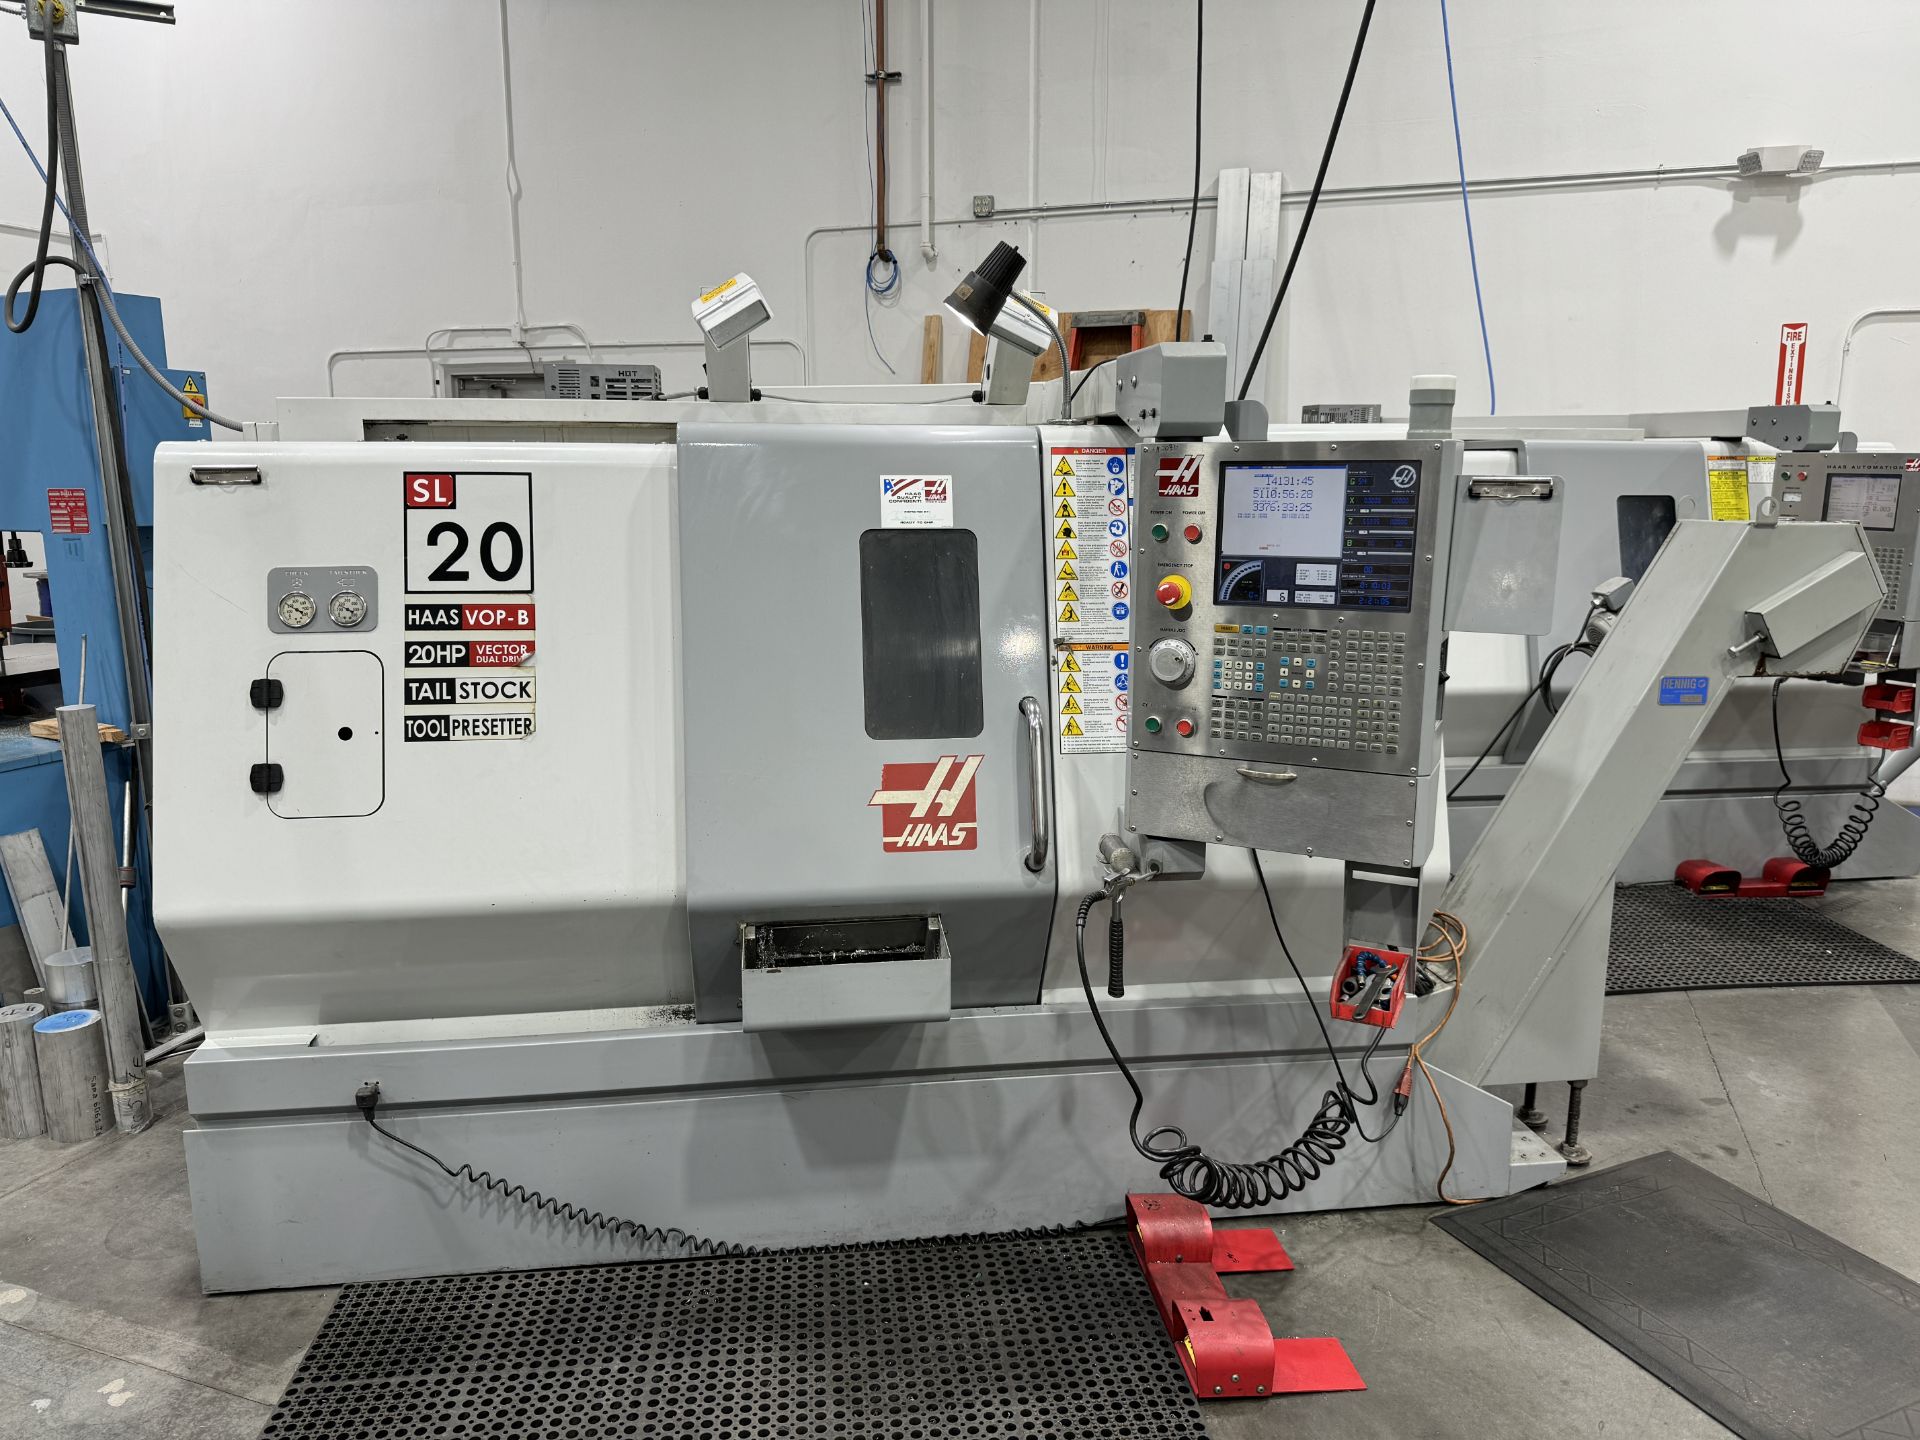 2007 HAAS SL-20T TURNING CENTER, 8" CHUCK, 5C COLLET NOSE, TAILSTOCK, 10-STATION TURRET, 2.0" BAR - Image 11 of 13